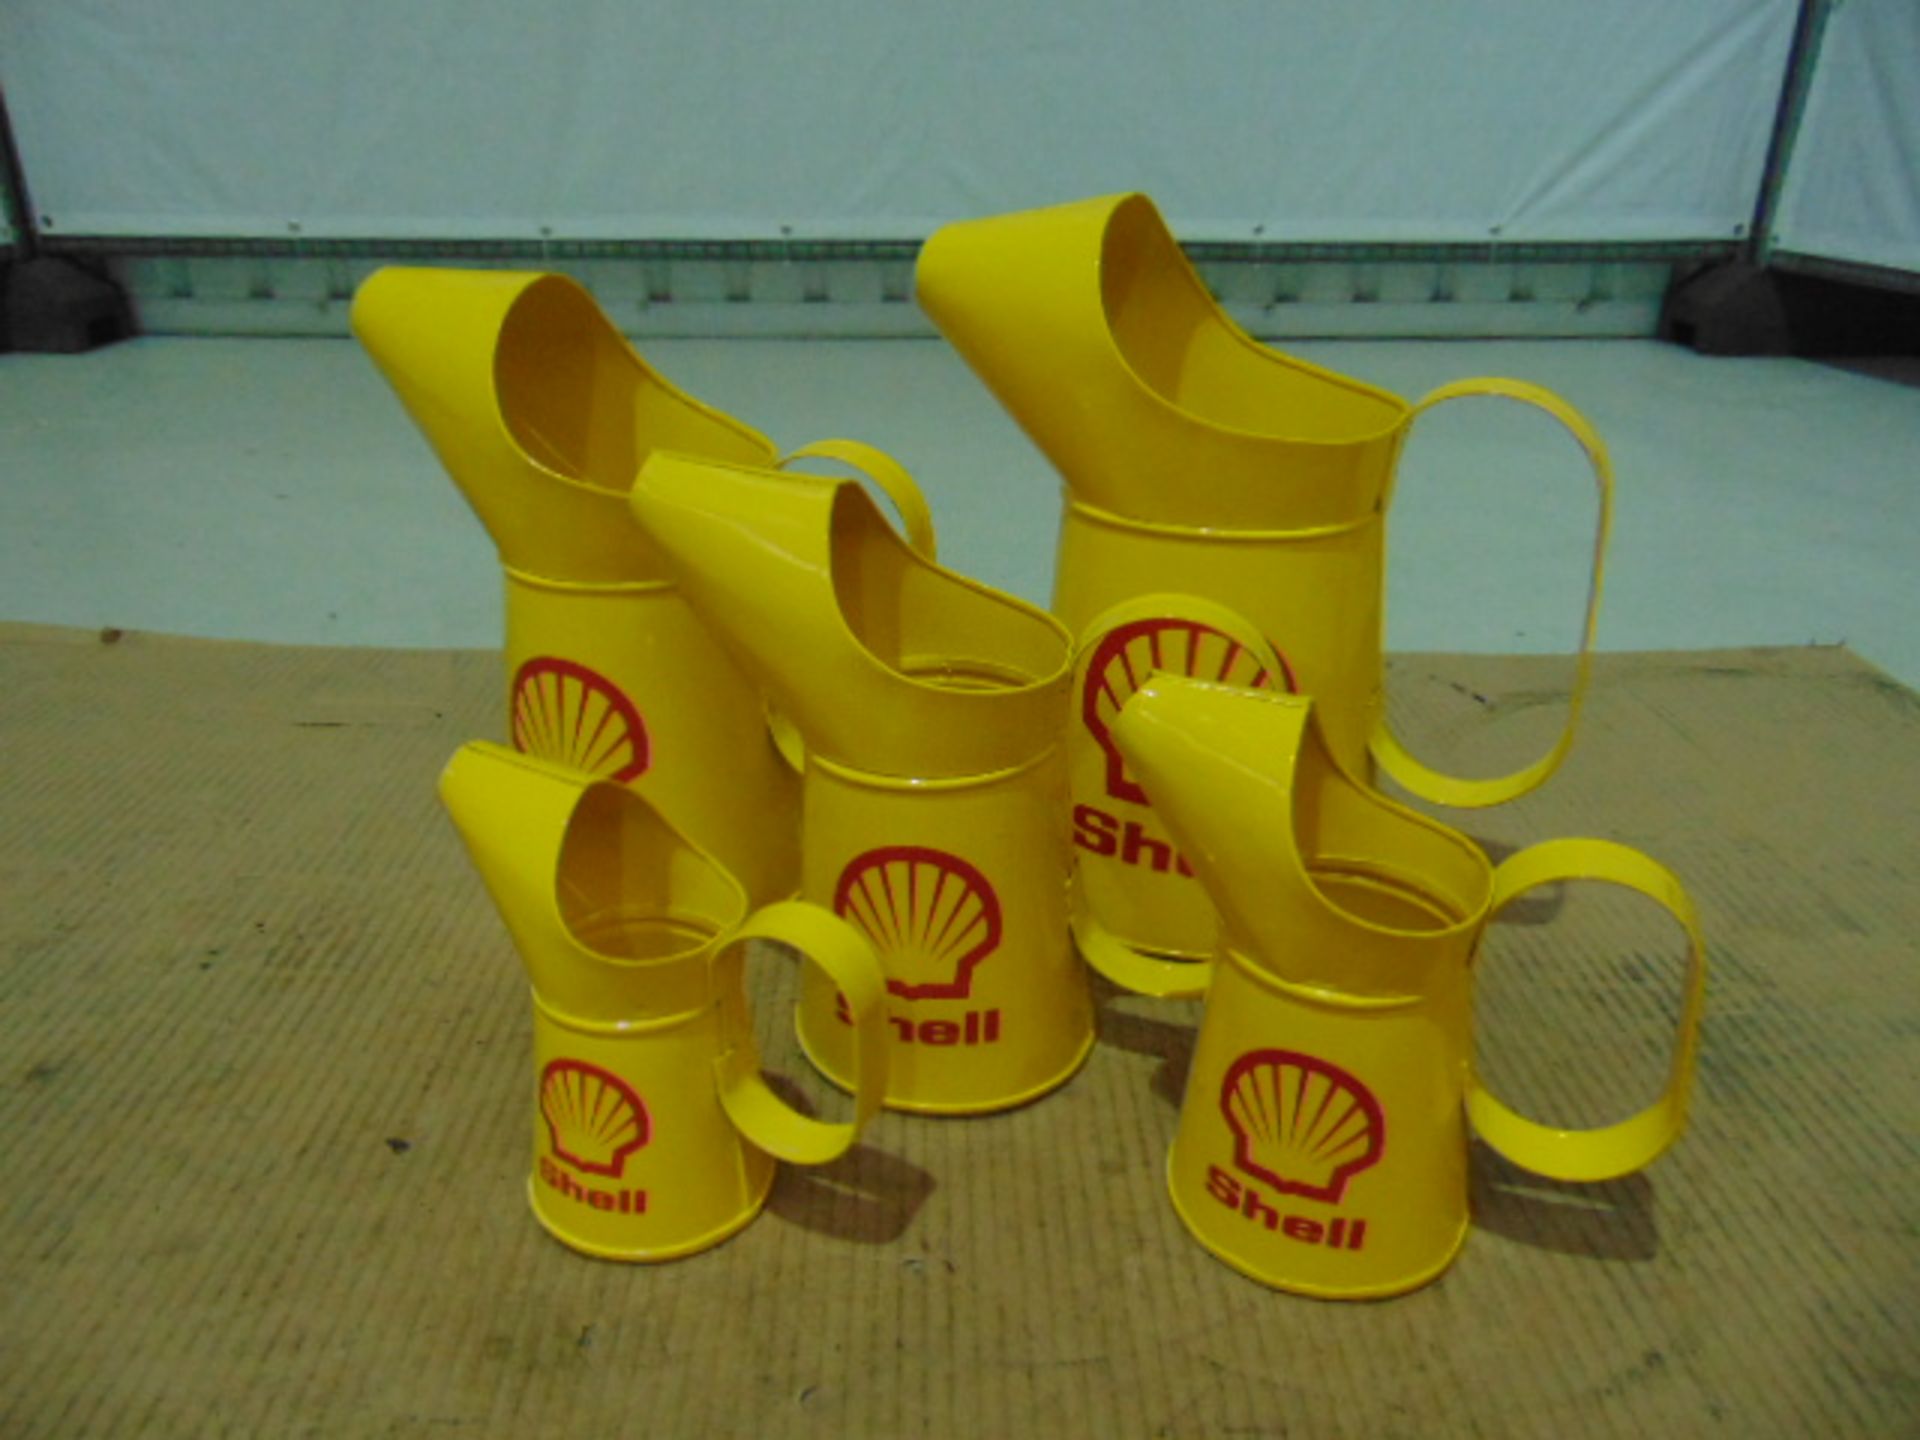 Set of 5 x Shell Branded Mixed Size Oil Pourer Cans